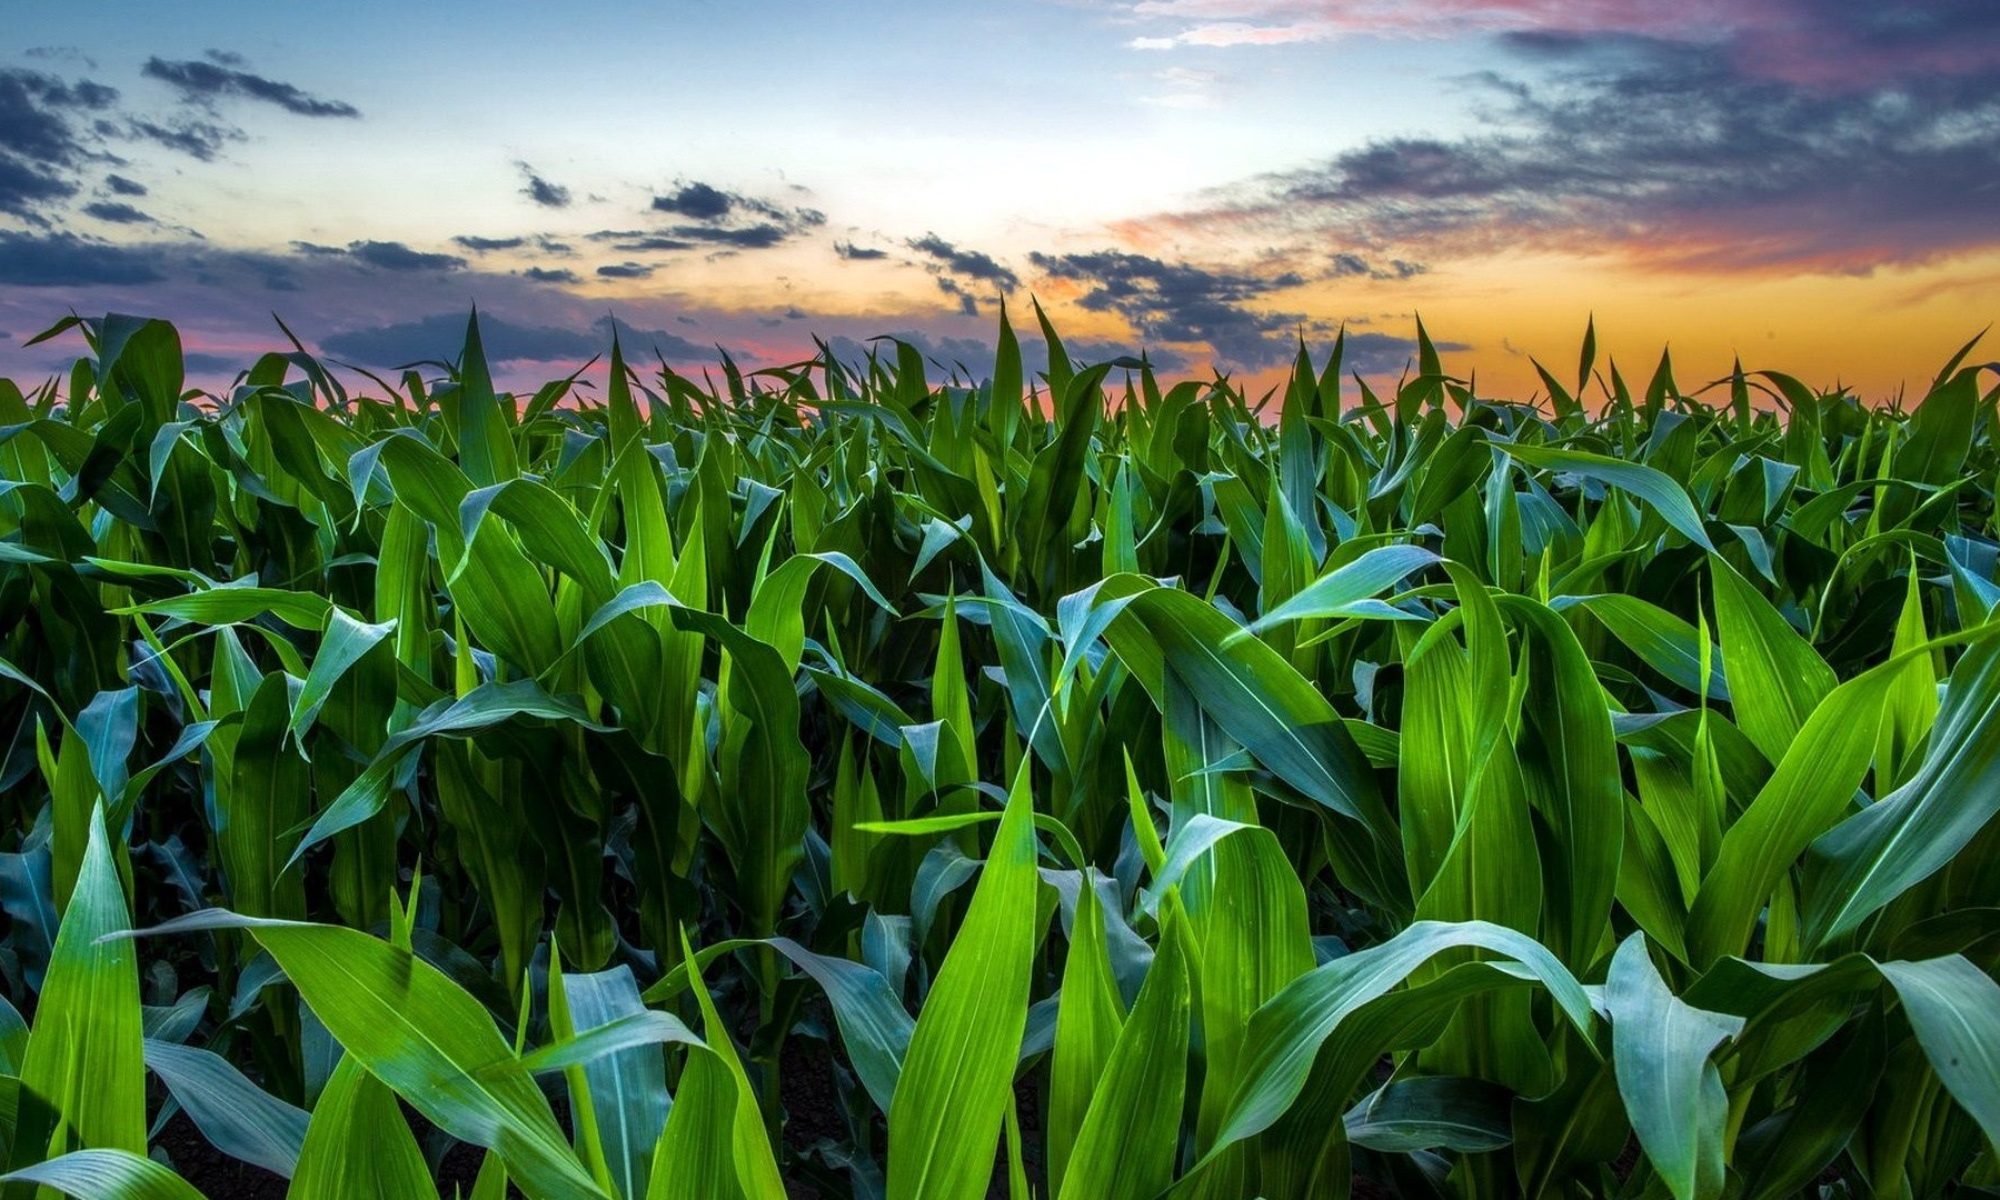 Looking over field of corn at dusk.